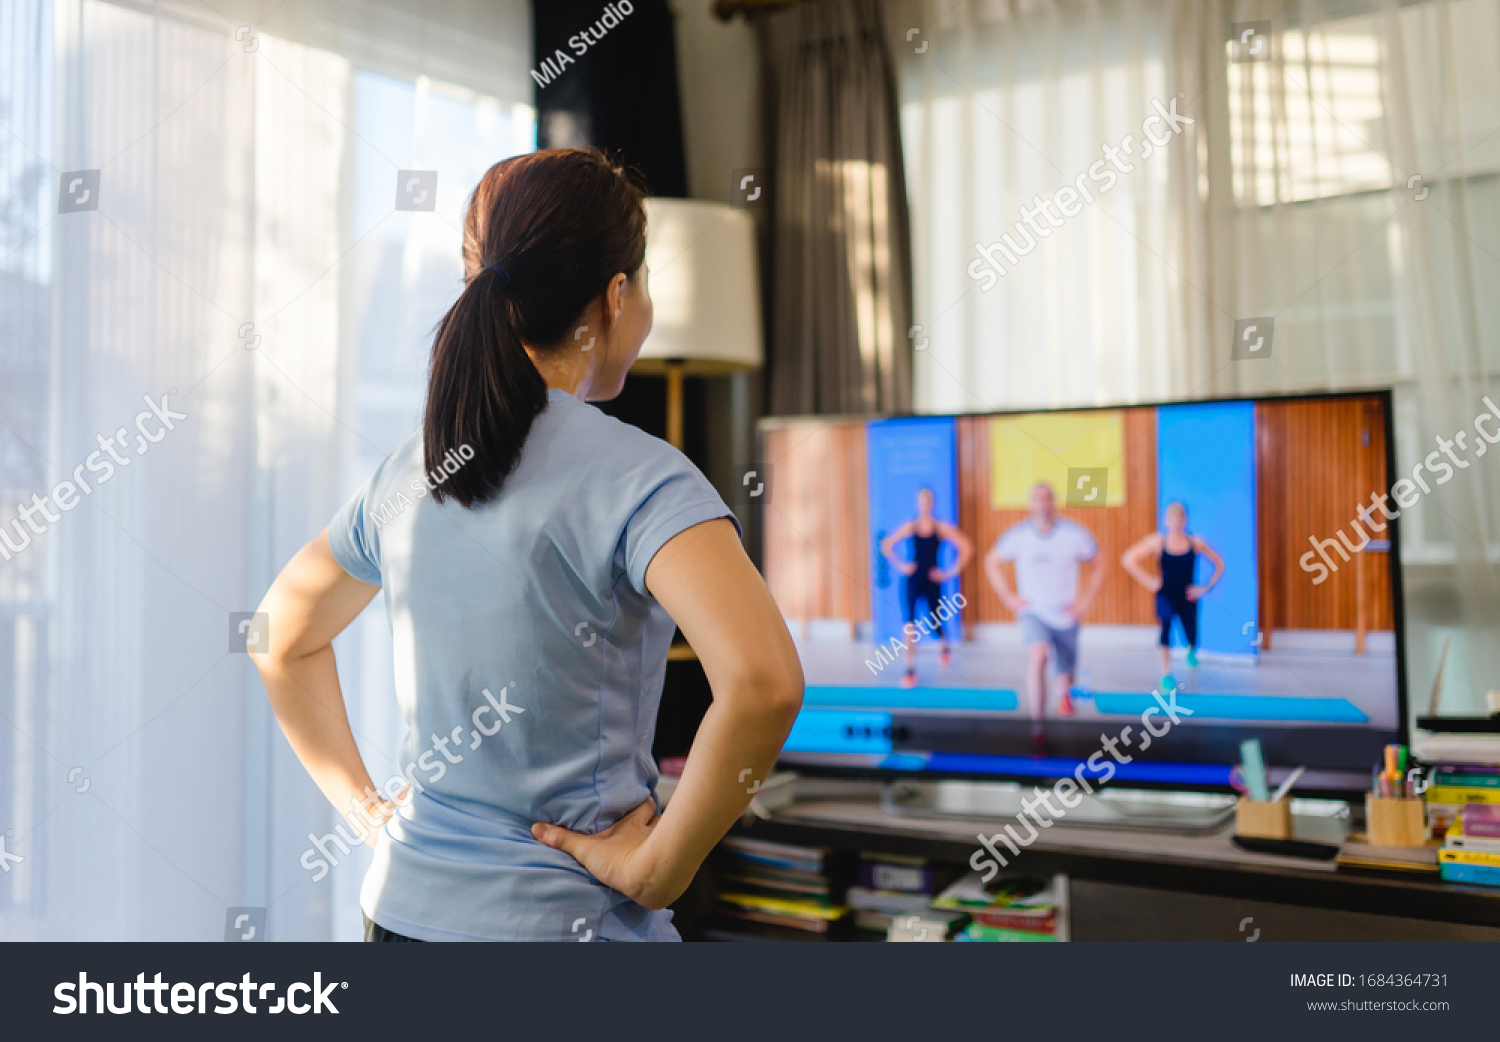 Video streaming Stay home.home fitness workout class live streaming online.Asian woman doing strength training cardio aerobic dance exercises watching videos on a smart tv in the living room at home. #1684364731